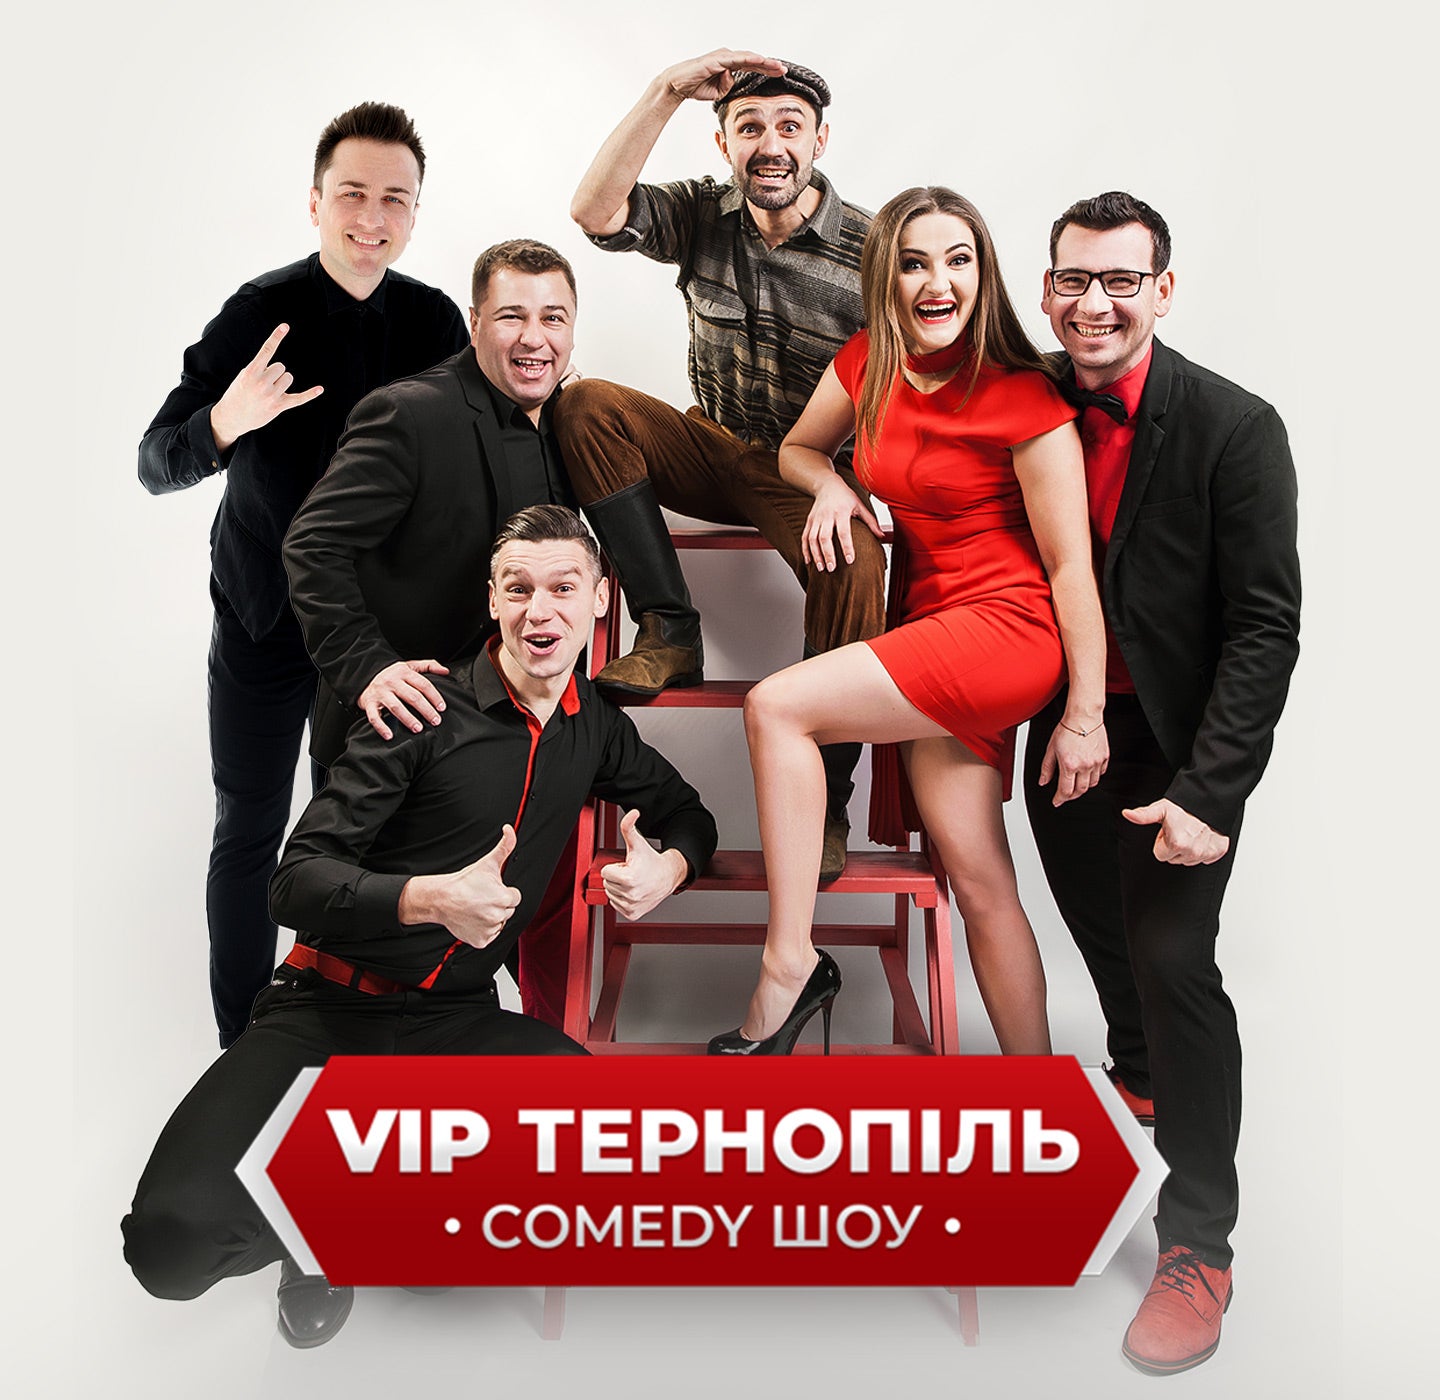 VIP Ternopil Comedy Show